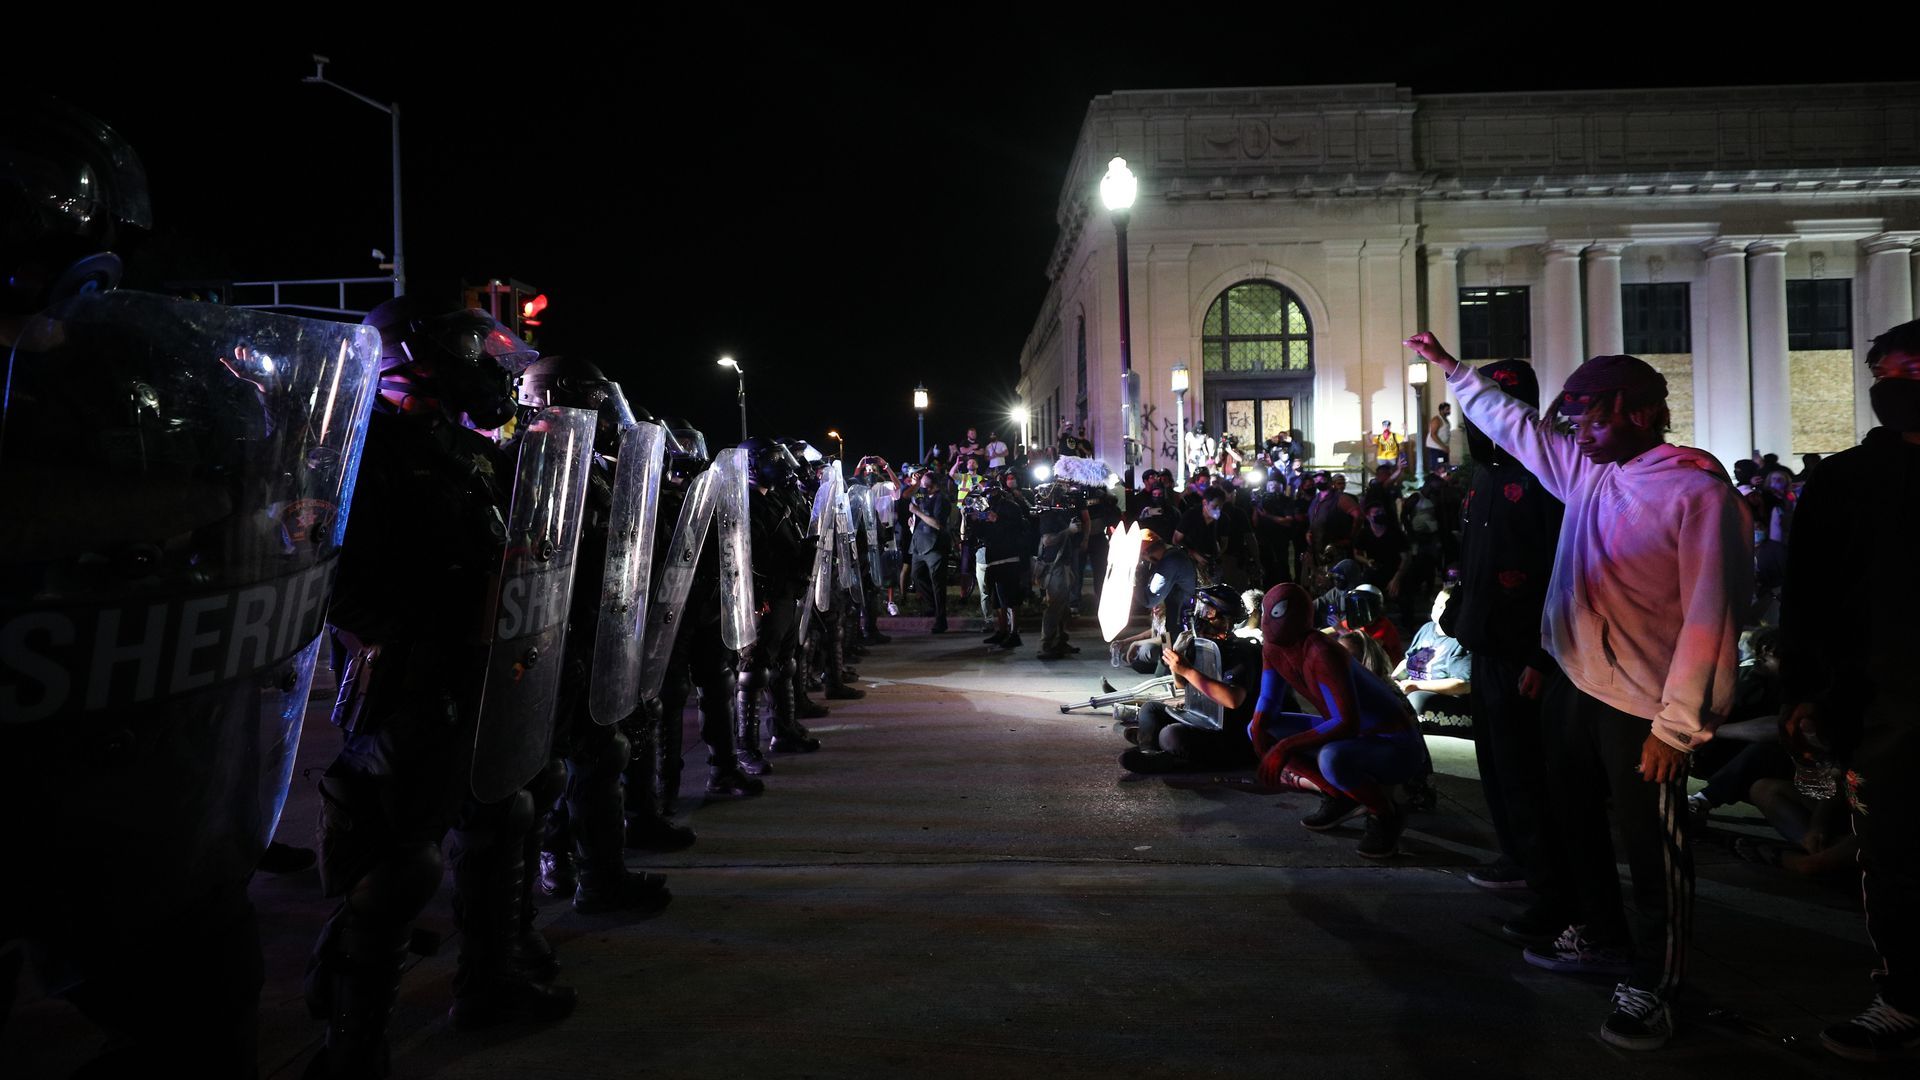 Protestors confront police in front of the Kenosha County Courthouse on August 25, 2020.